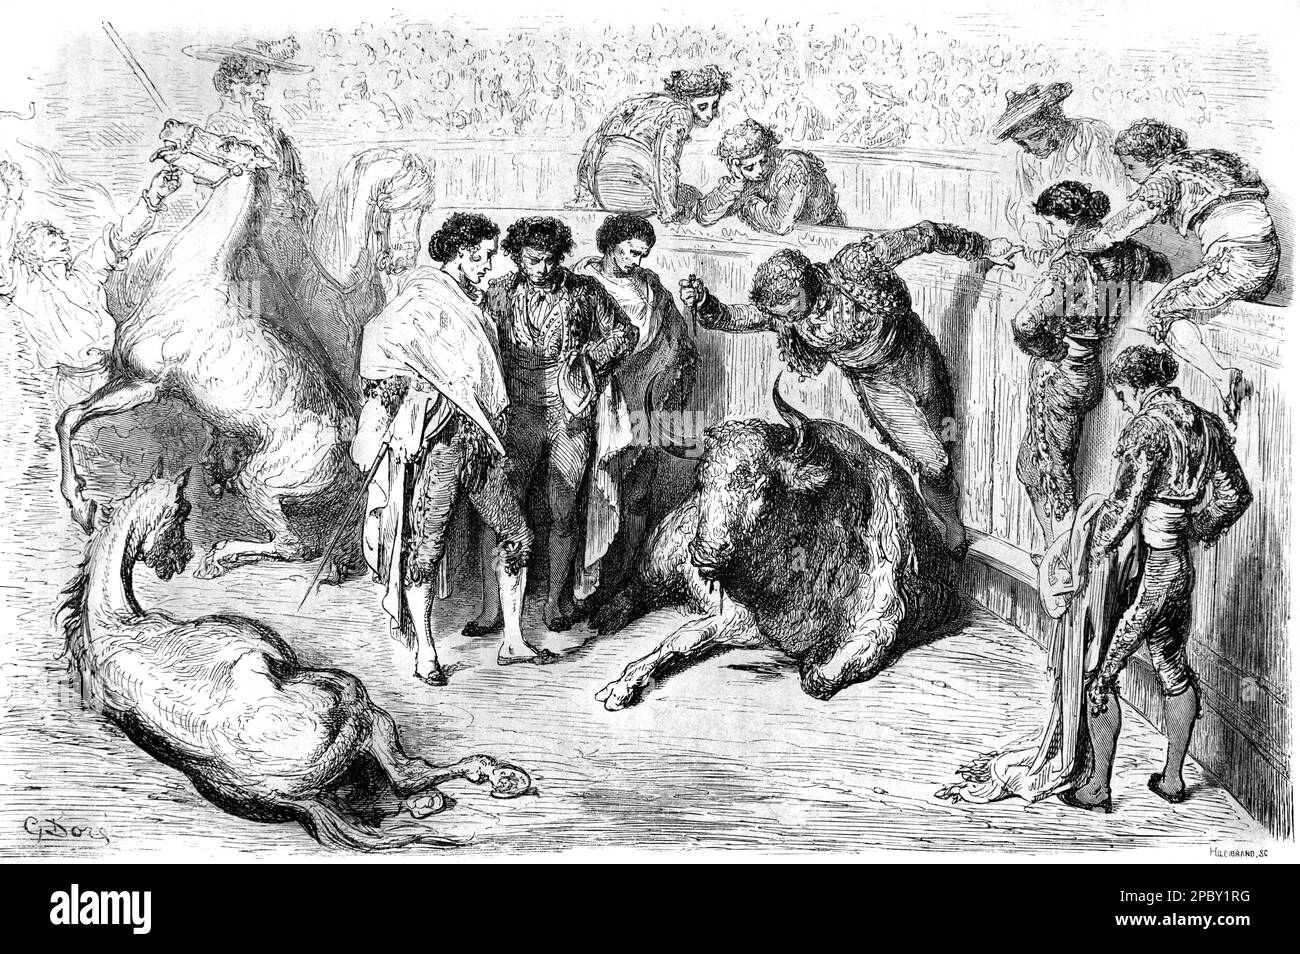 Killing of Bull with a Puntilla Knife or Dagger during a Spanish Bullfight or Corrida Spain. Vintage or Historic Engraving or Illustration by Gustave Doré 1862 Stock Photo